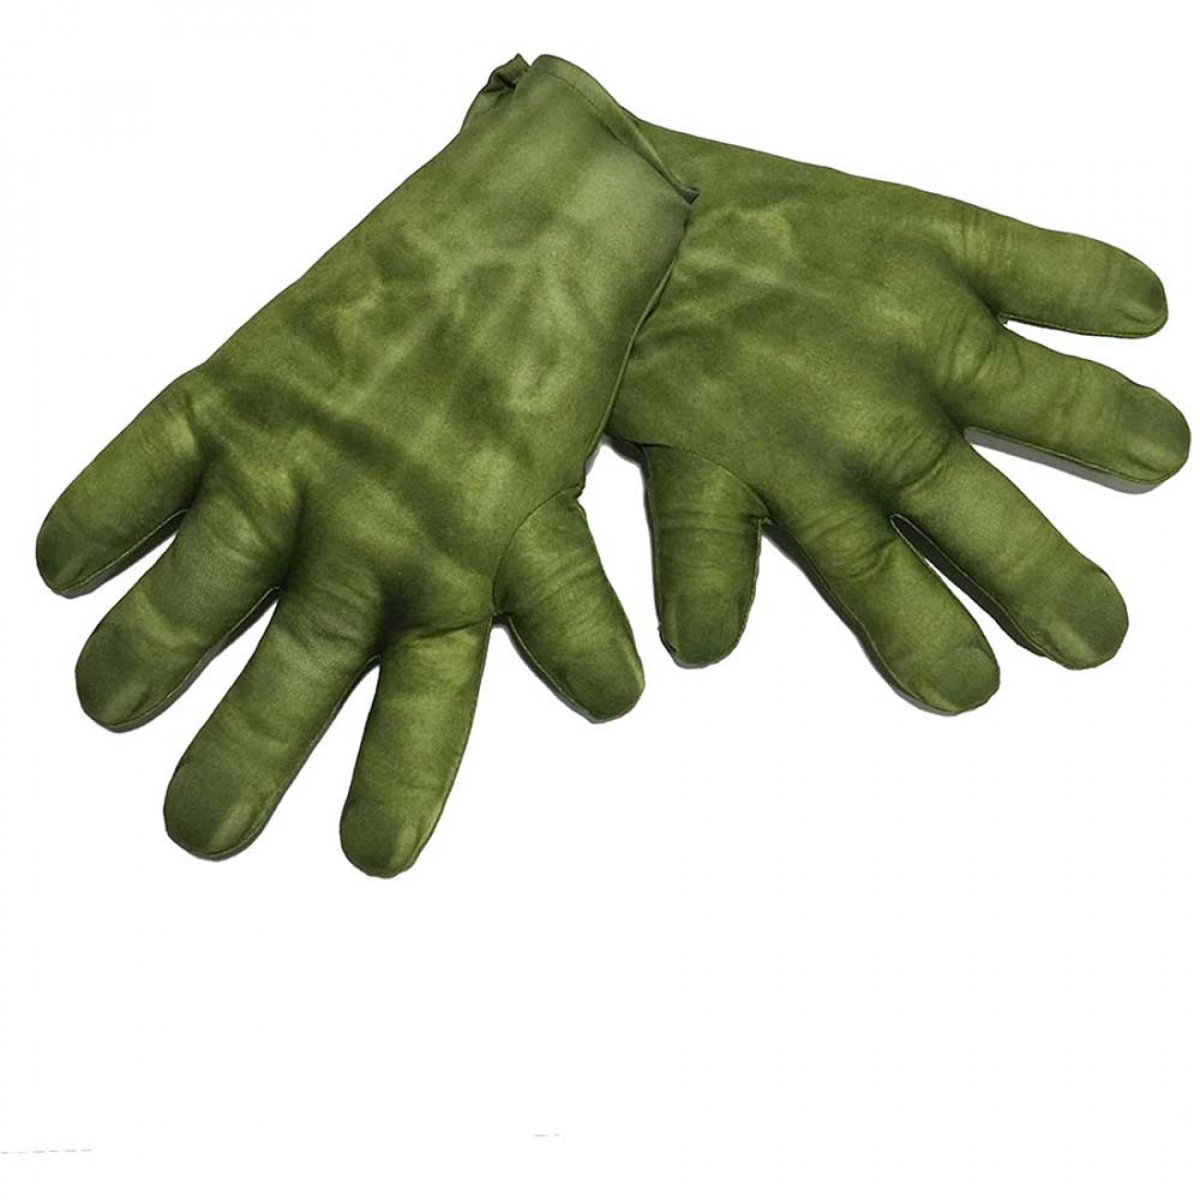 Picture of Redible Hulk 834870 Hulk Padded Child Costume Gloves